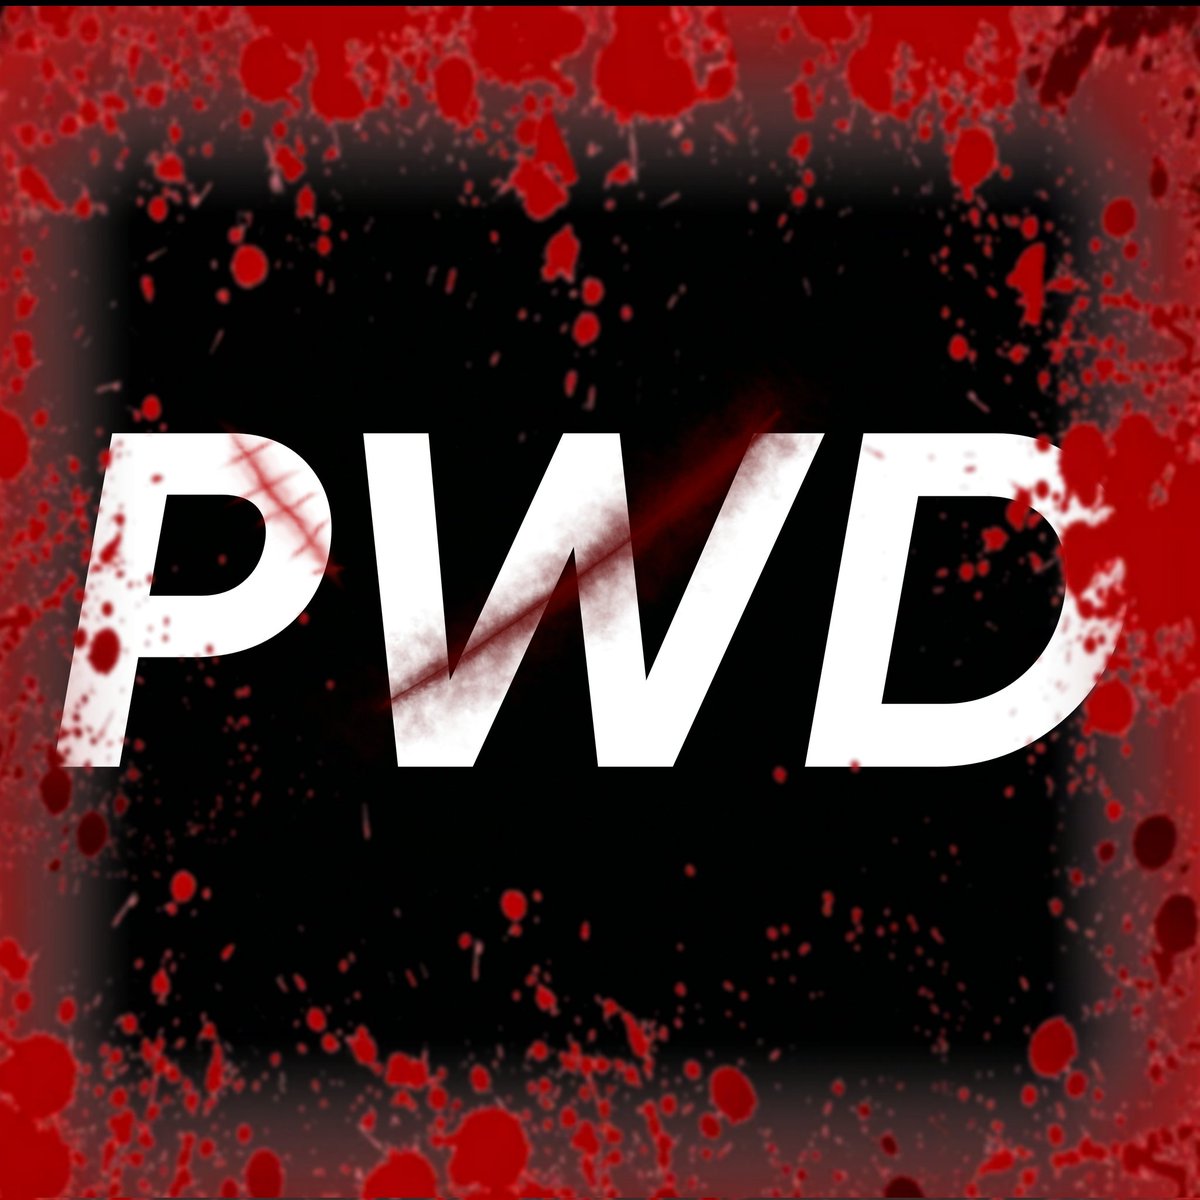 Welcome to the first episode of PWD!!!
🎇🎆